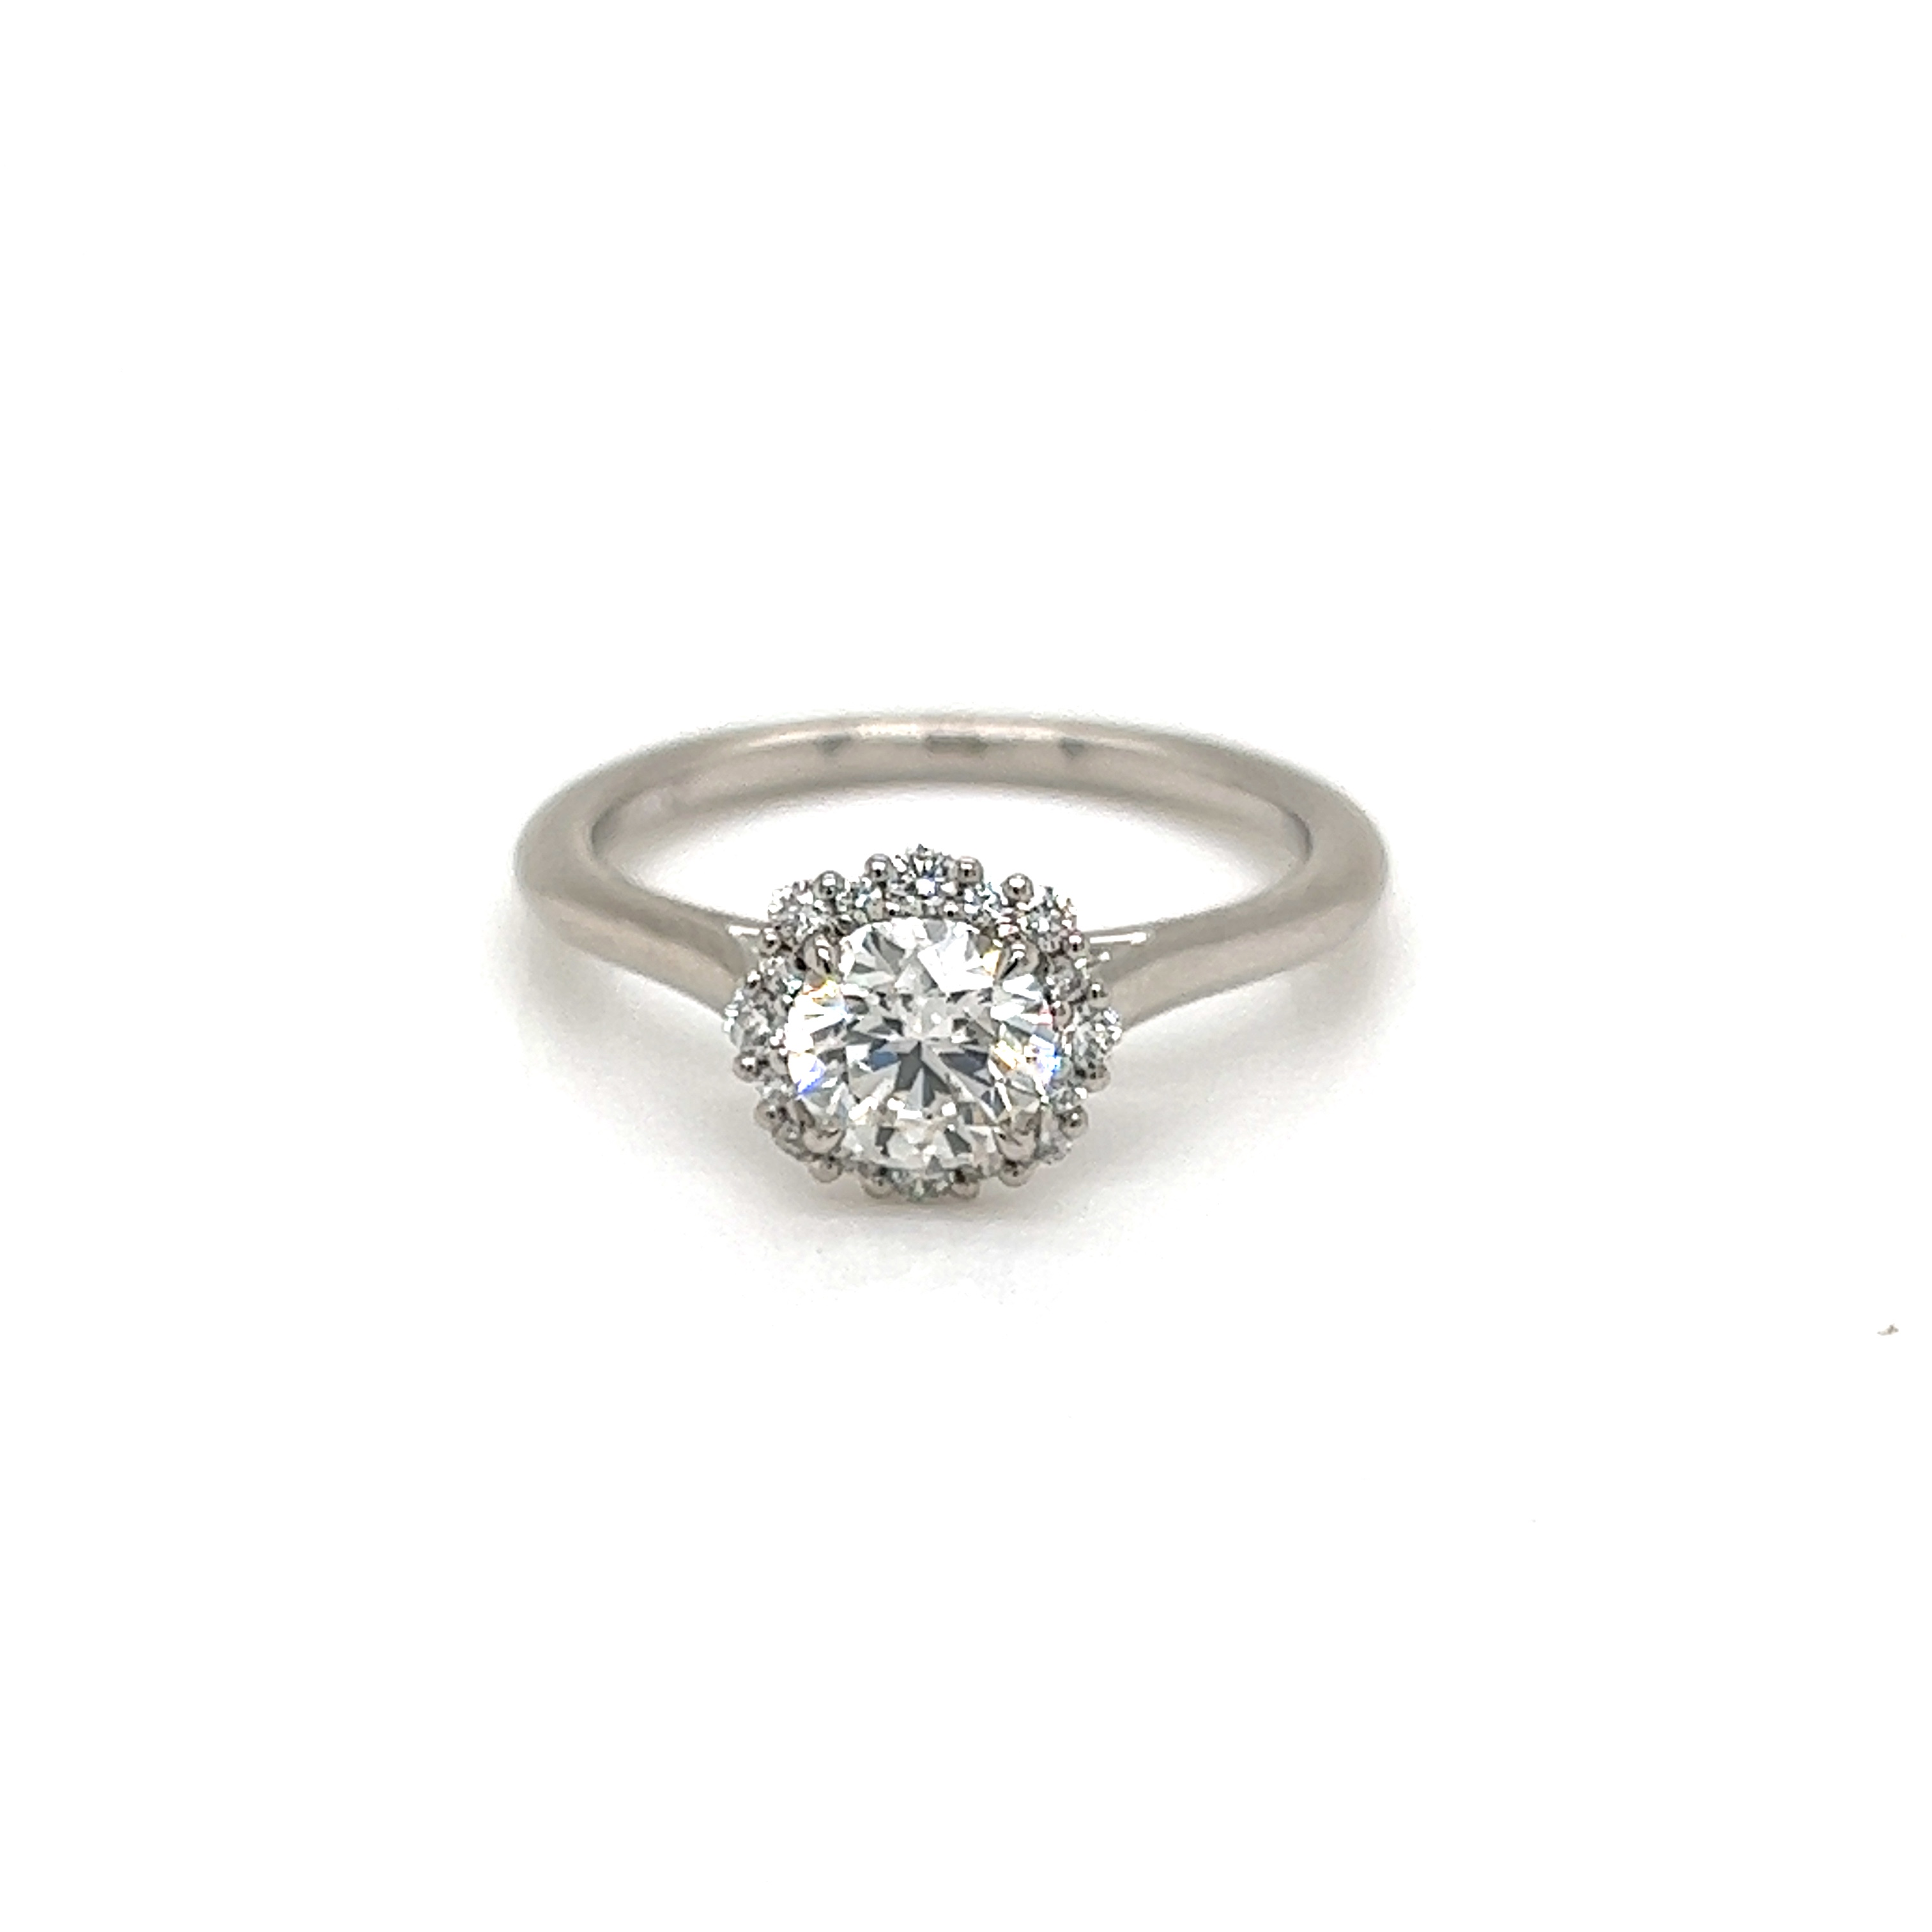 Platinum Engagement Ring Size With One 0.73Ct Round Brilliant G SI2 Forevermark Diamond 5932566  And 16=0.13Tw Round Brilliant G VS Diamonds.